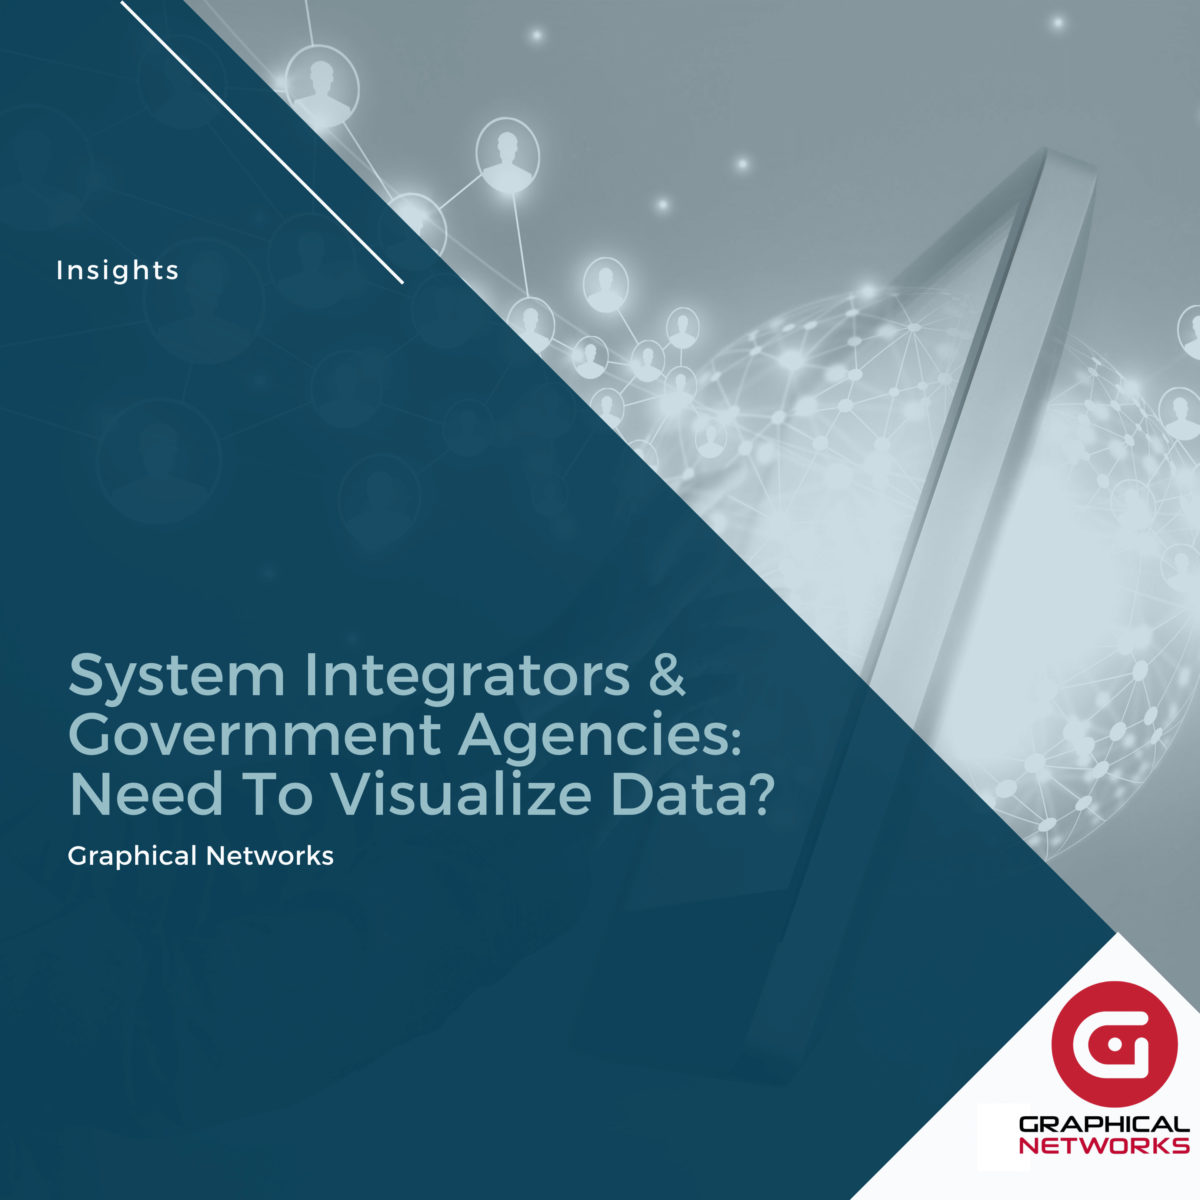 System Integrators & Government Agencies: Need To Visualize Data?